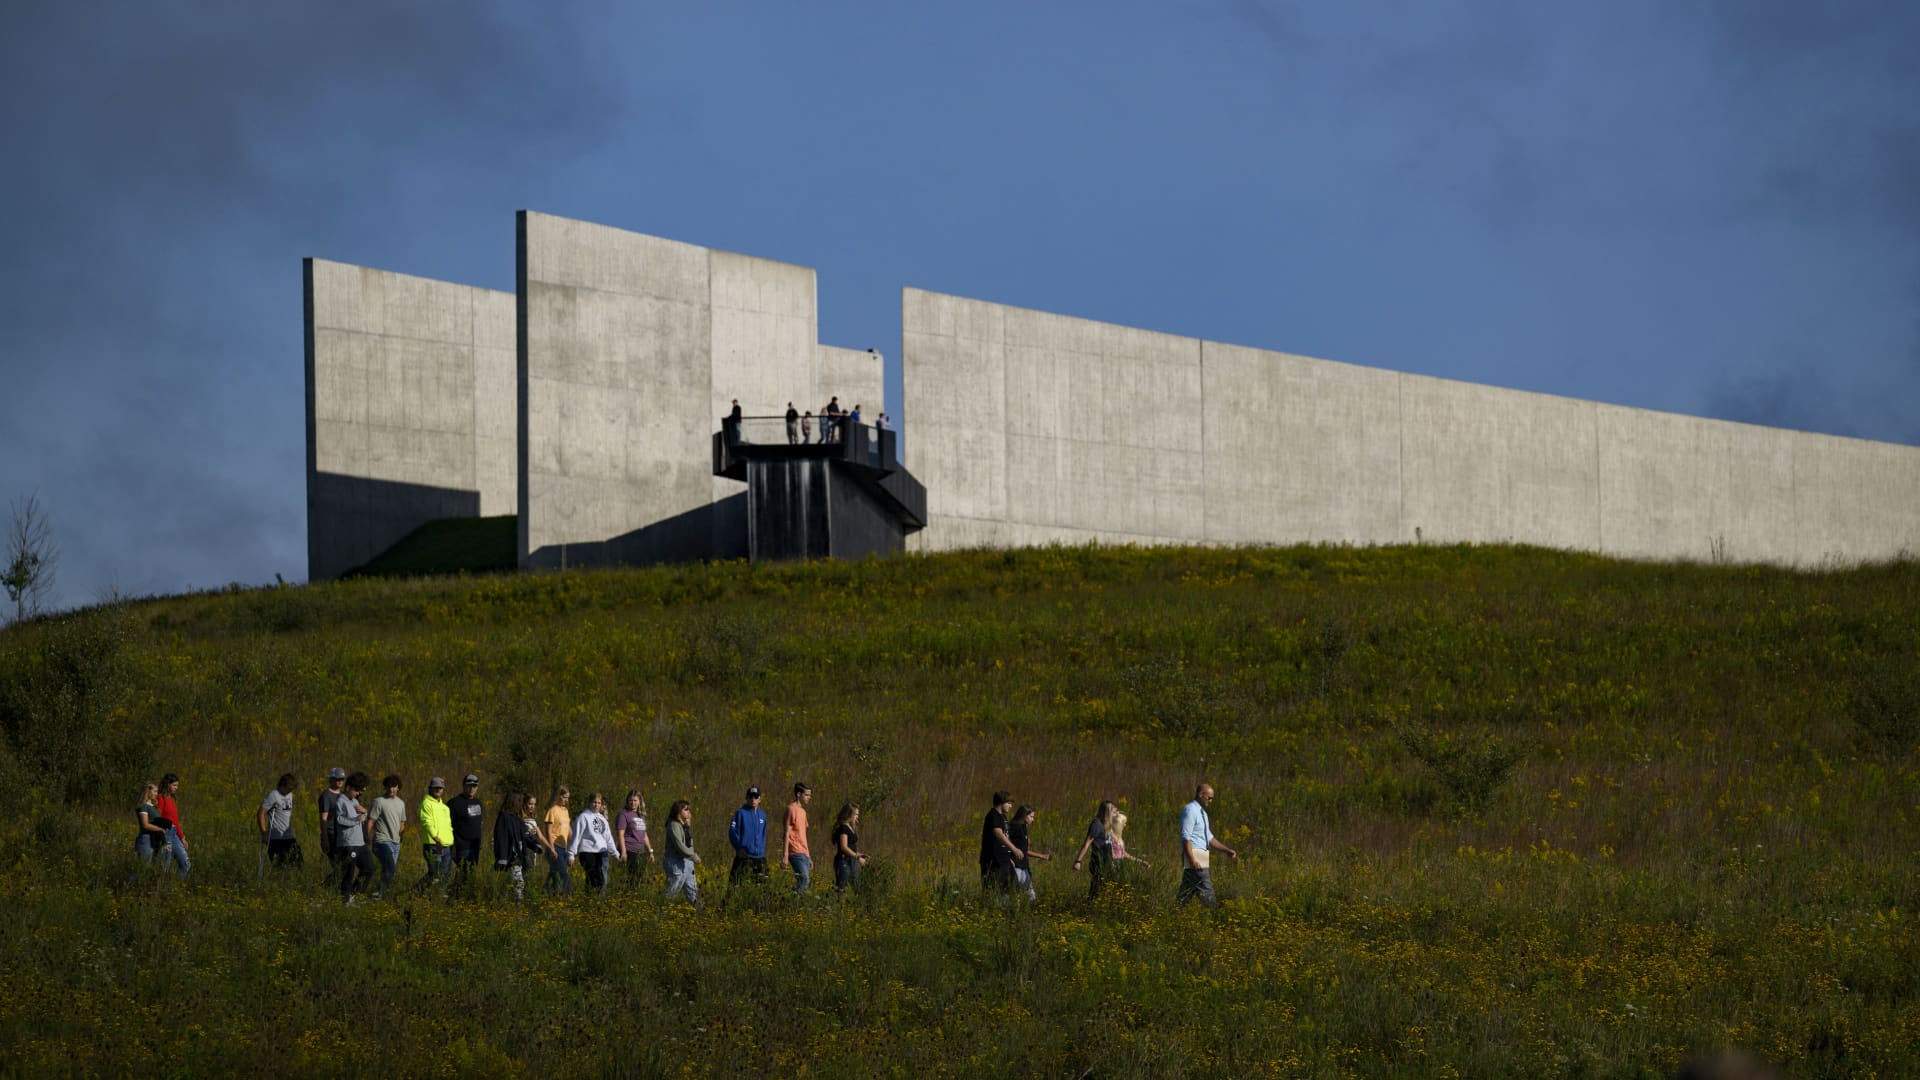 Visitors stroll through the national park grounds during a ceremony commemorating the 22nd anniversary of the crash of Flight 93 during the September 11, 2001 terrorist attacks at the Flight 93 National Memorial on September 11, 2023 in Shanksville, Pennsylvania. 